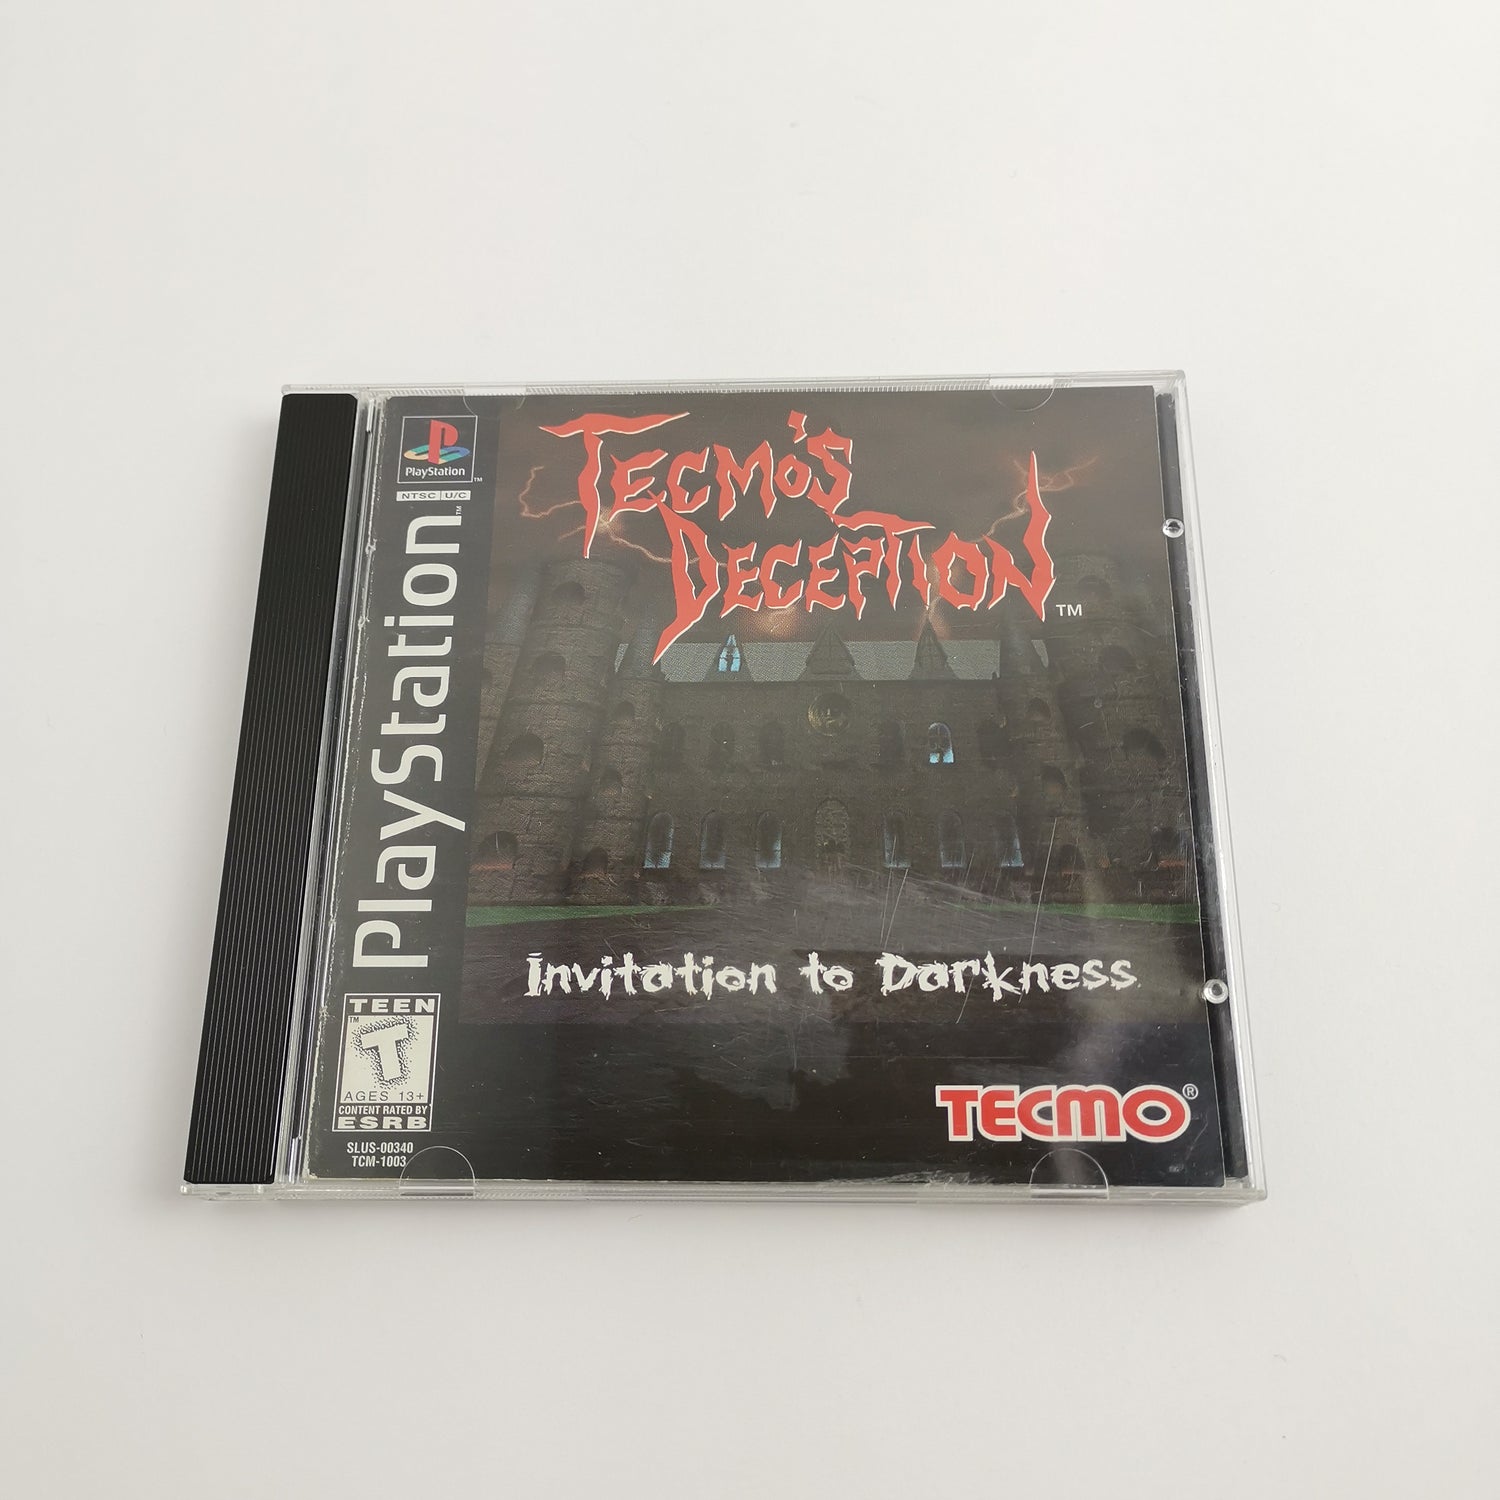 Sony Playstation 1 Game: Tecmo's Deception Invitation to Darkness | PS1 USA